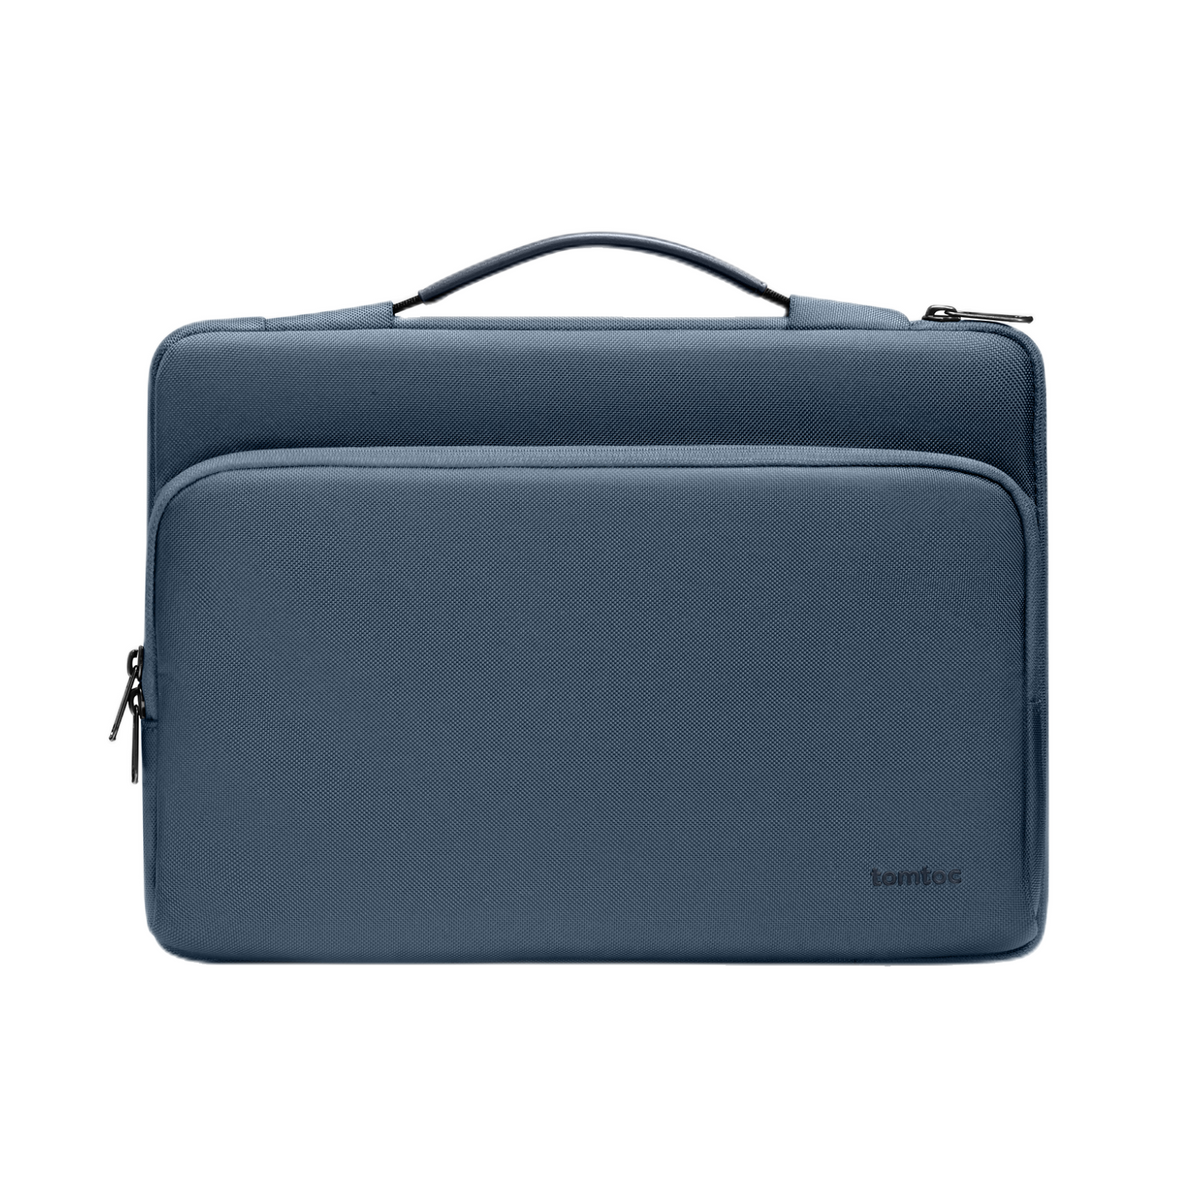 primary_Defender-A14 Laptop Briefcase For 13-inch New MacBook Pro & Air